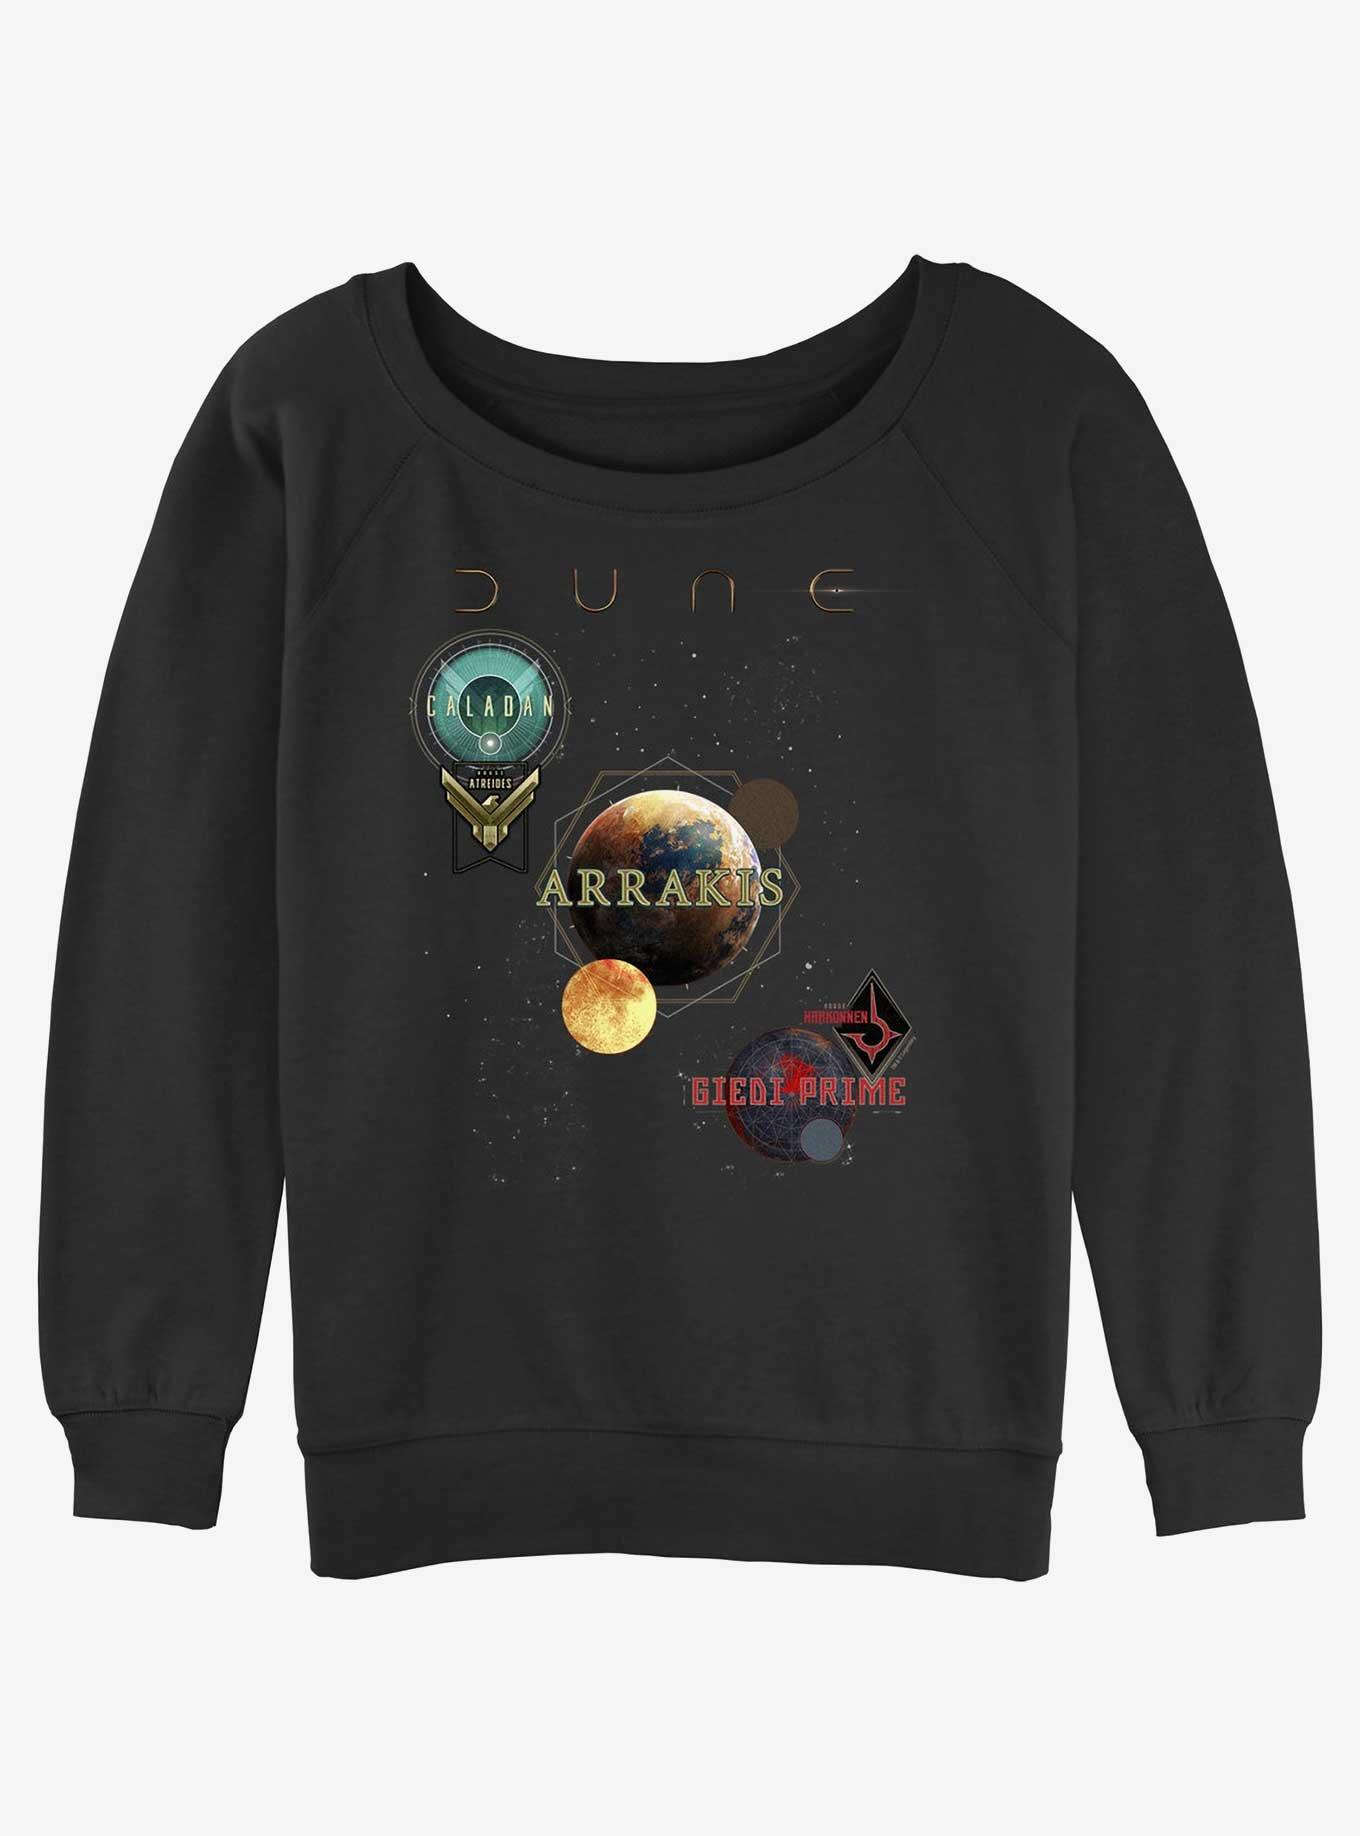 Dune: Part Two Planets Poster Girls Slouchy Sweatshirt, BLACK, hi-res